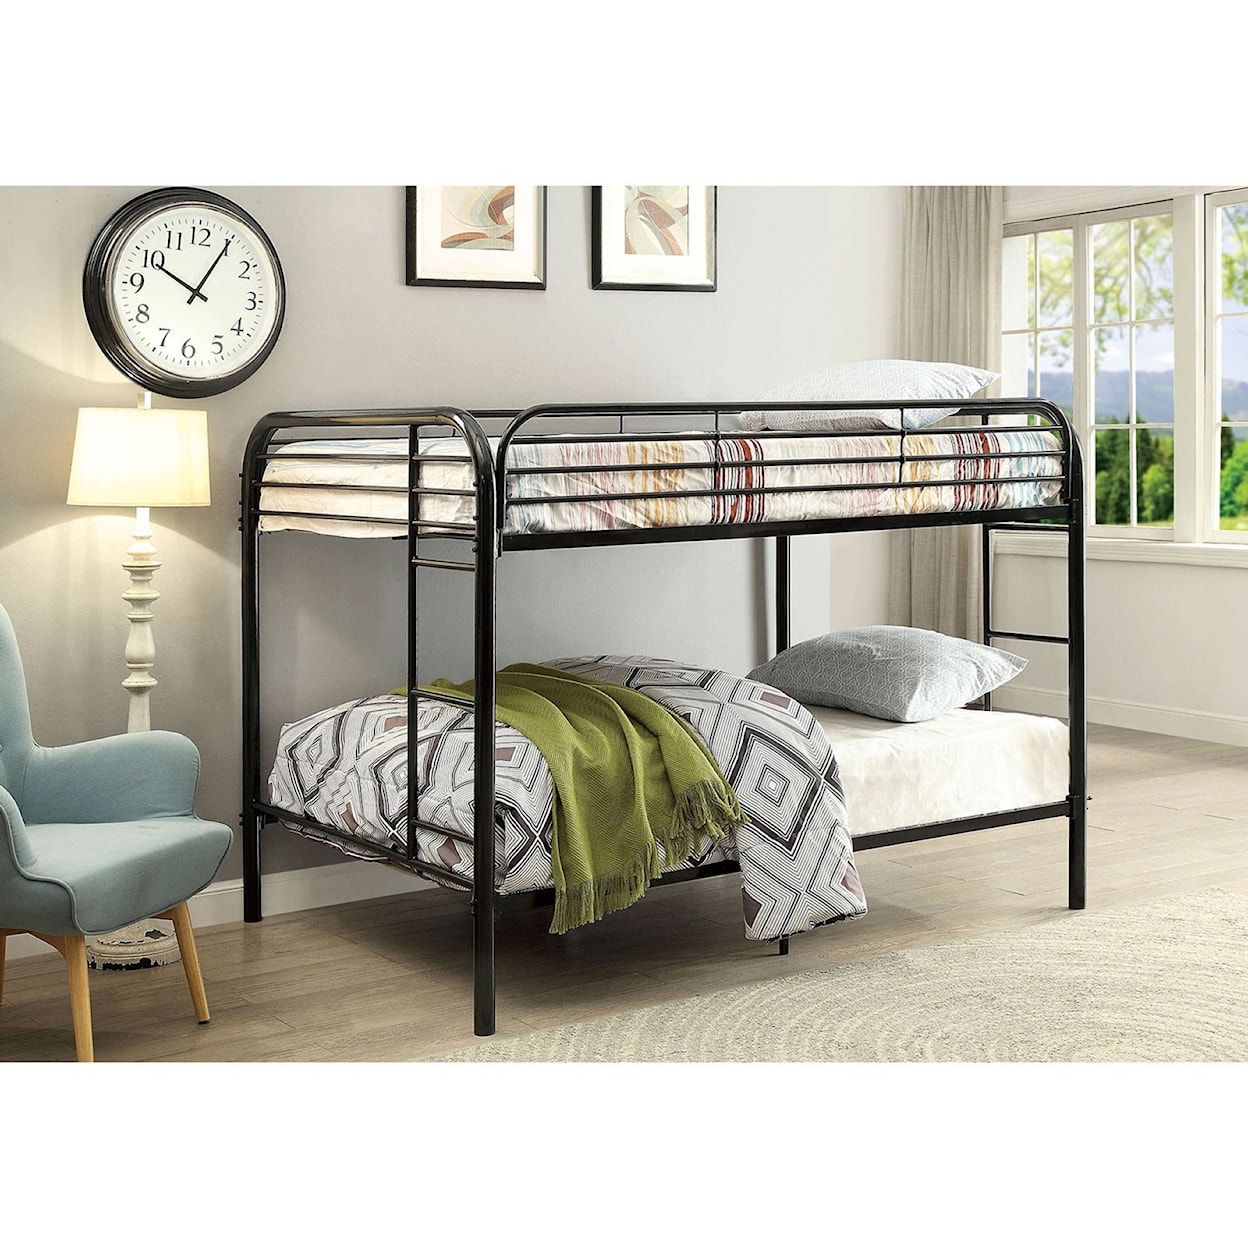 Furniture of America Opal Full-over-Full Bunk Bed